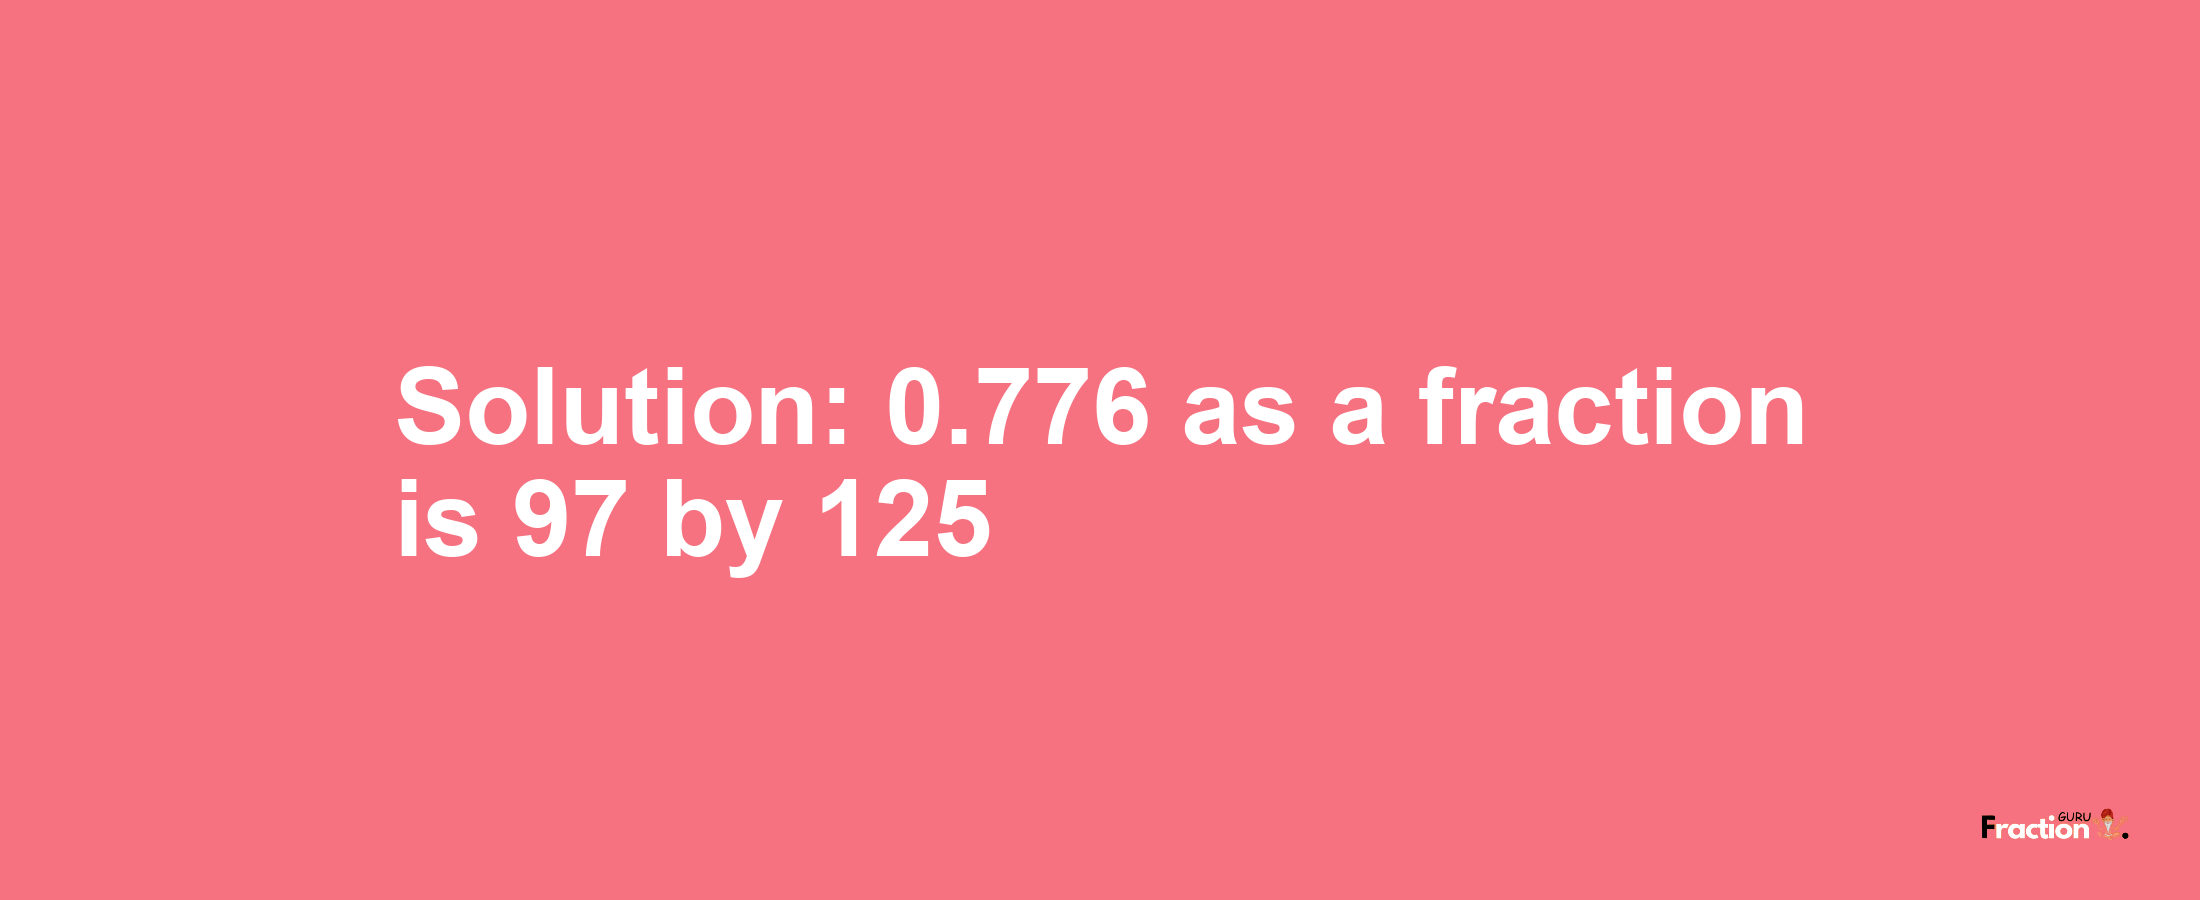 Solution:0.776 as a fraction is 97/125